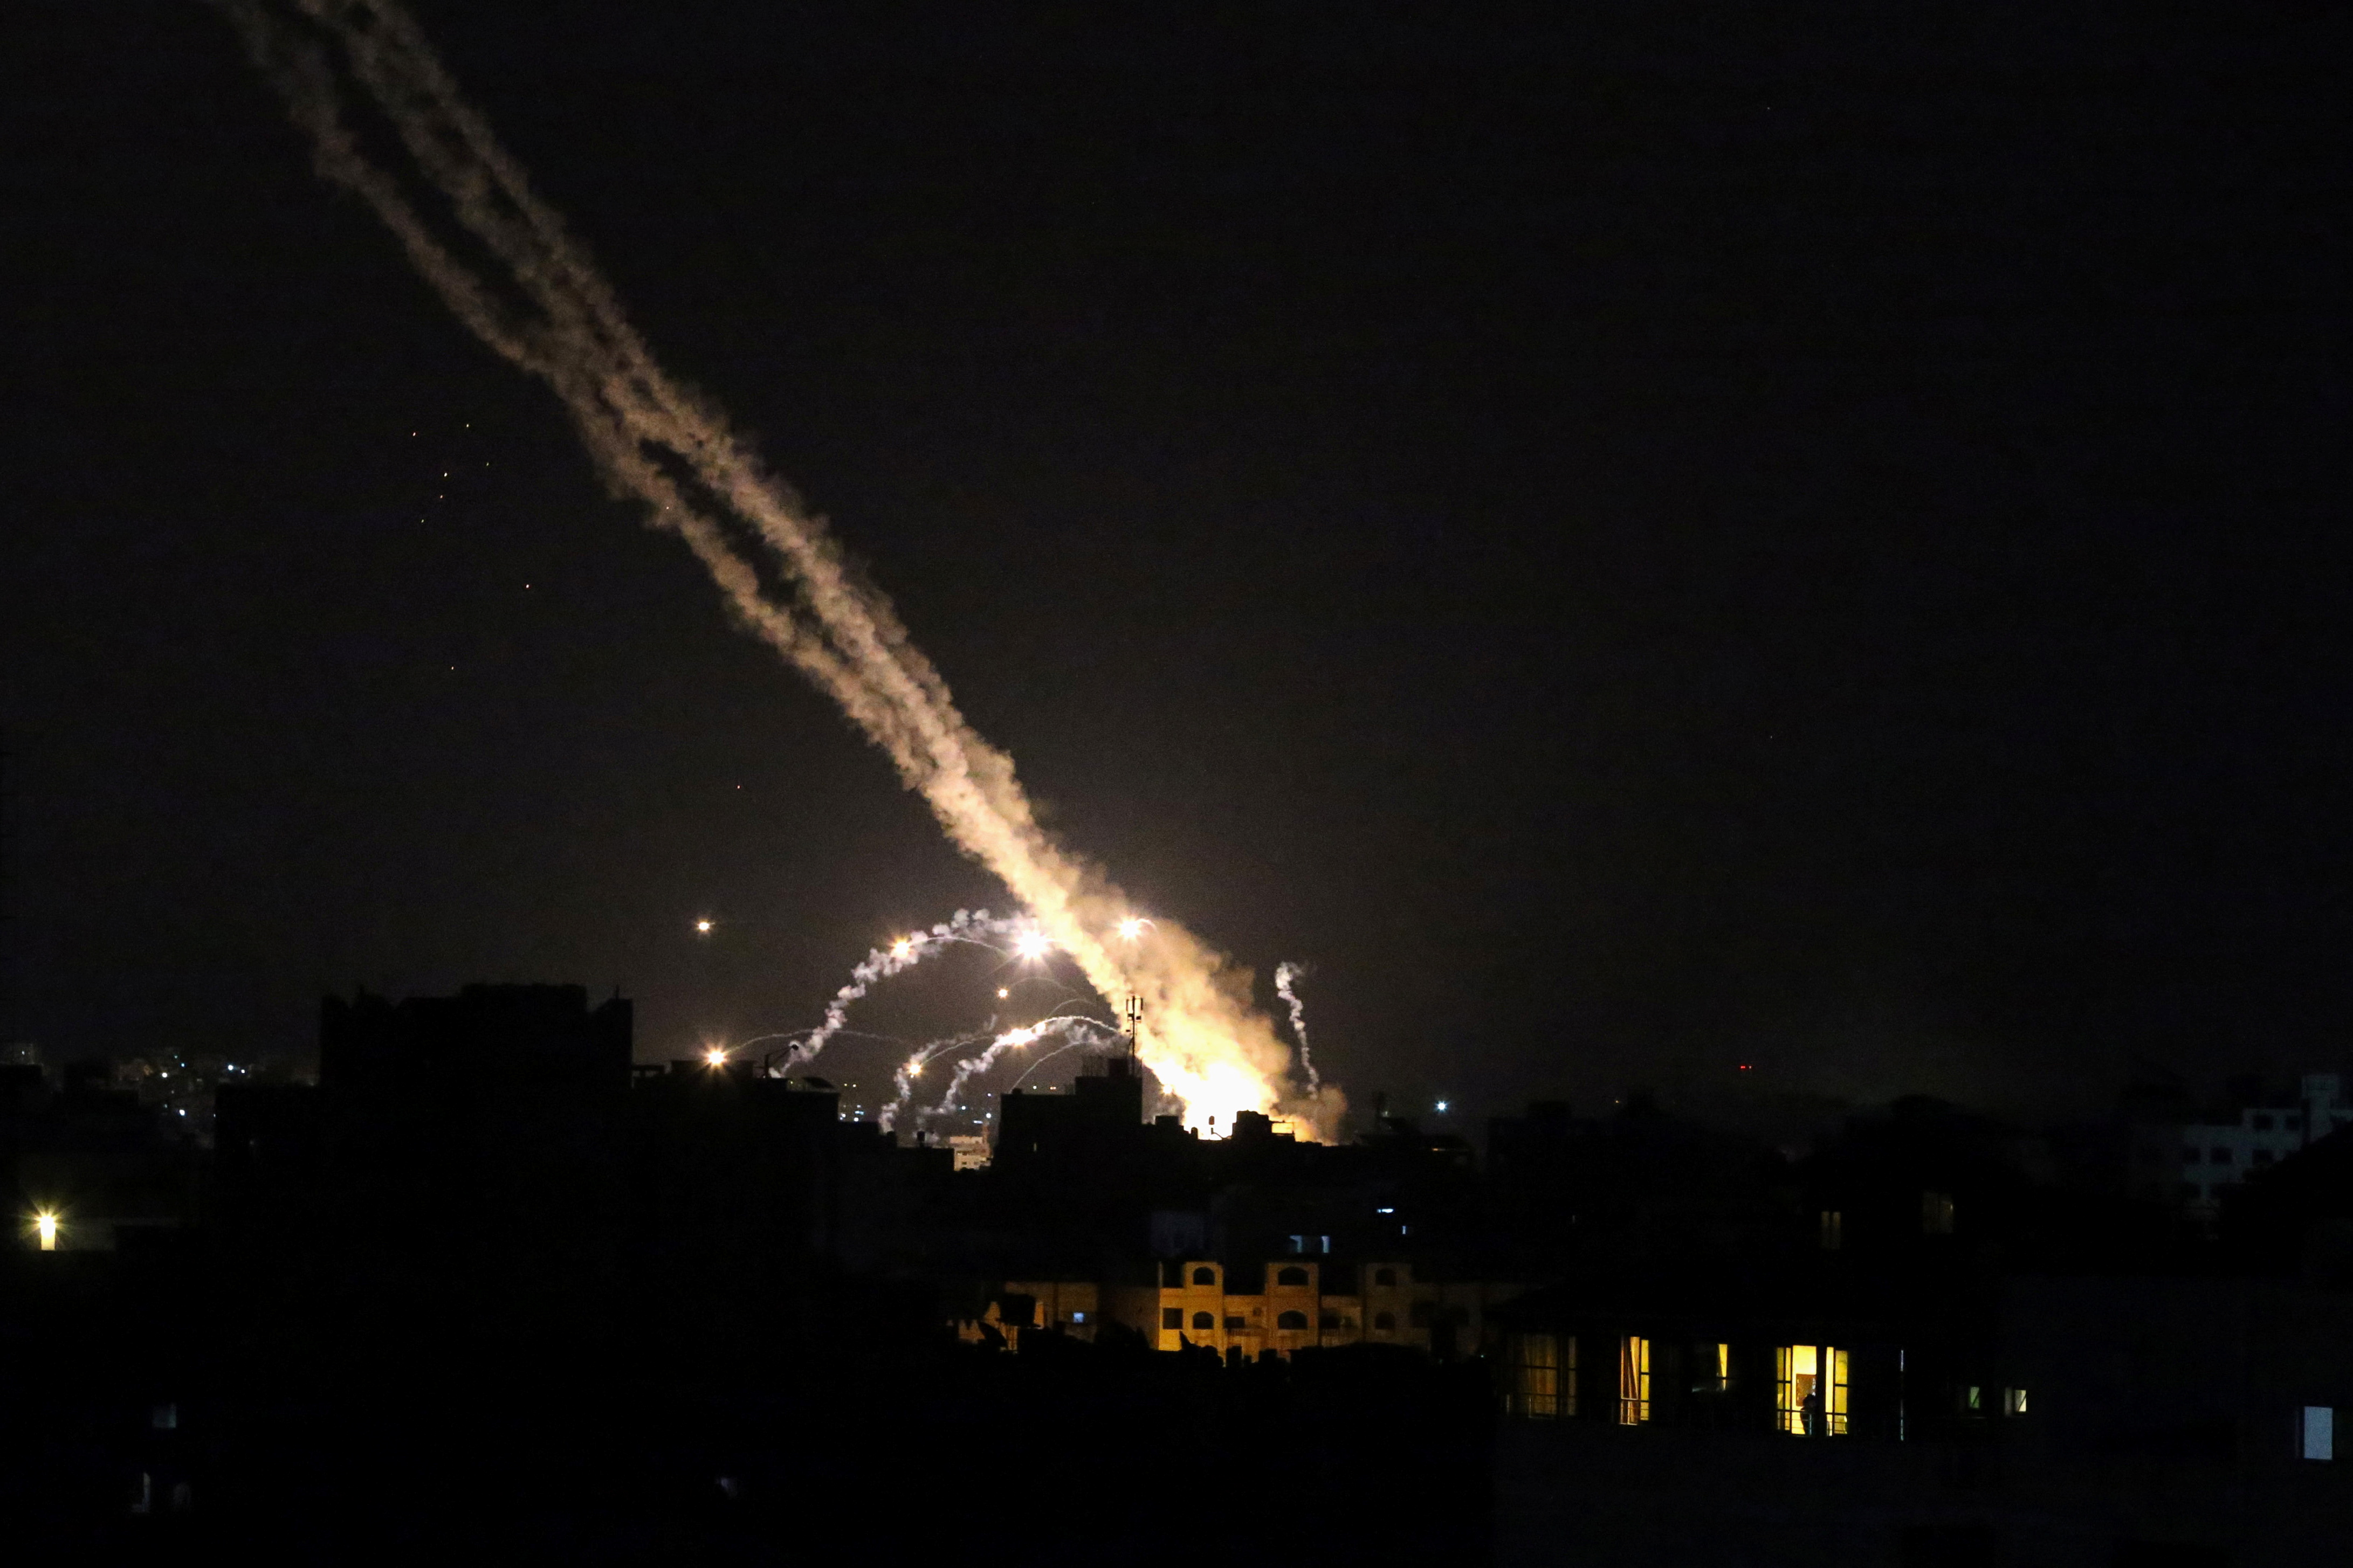 Rockets are launched by Palestinian militants into Israel, in Gaza May 13, 2021. REUTERS/Ibraheem Abu Mustafa